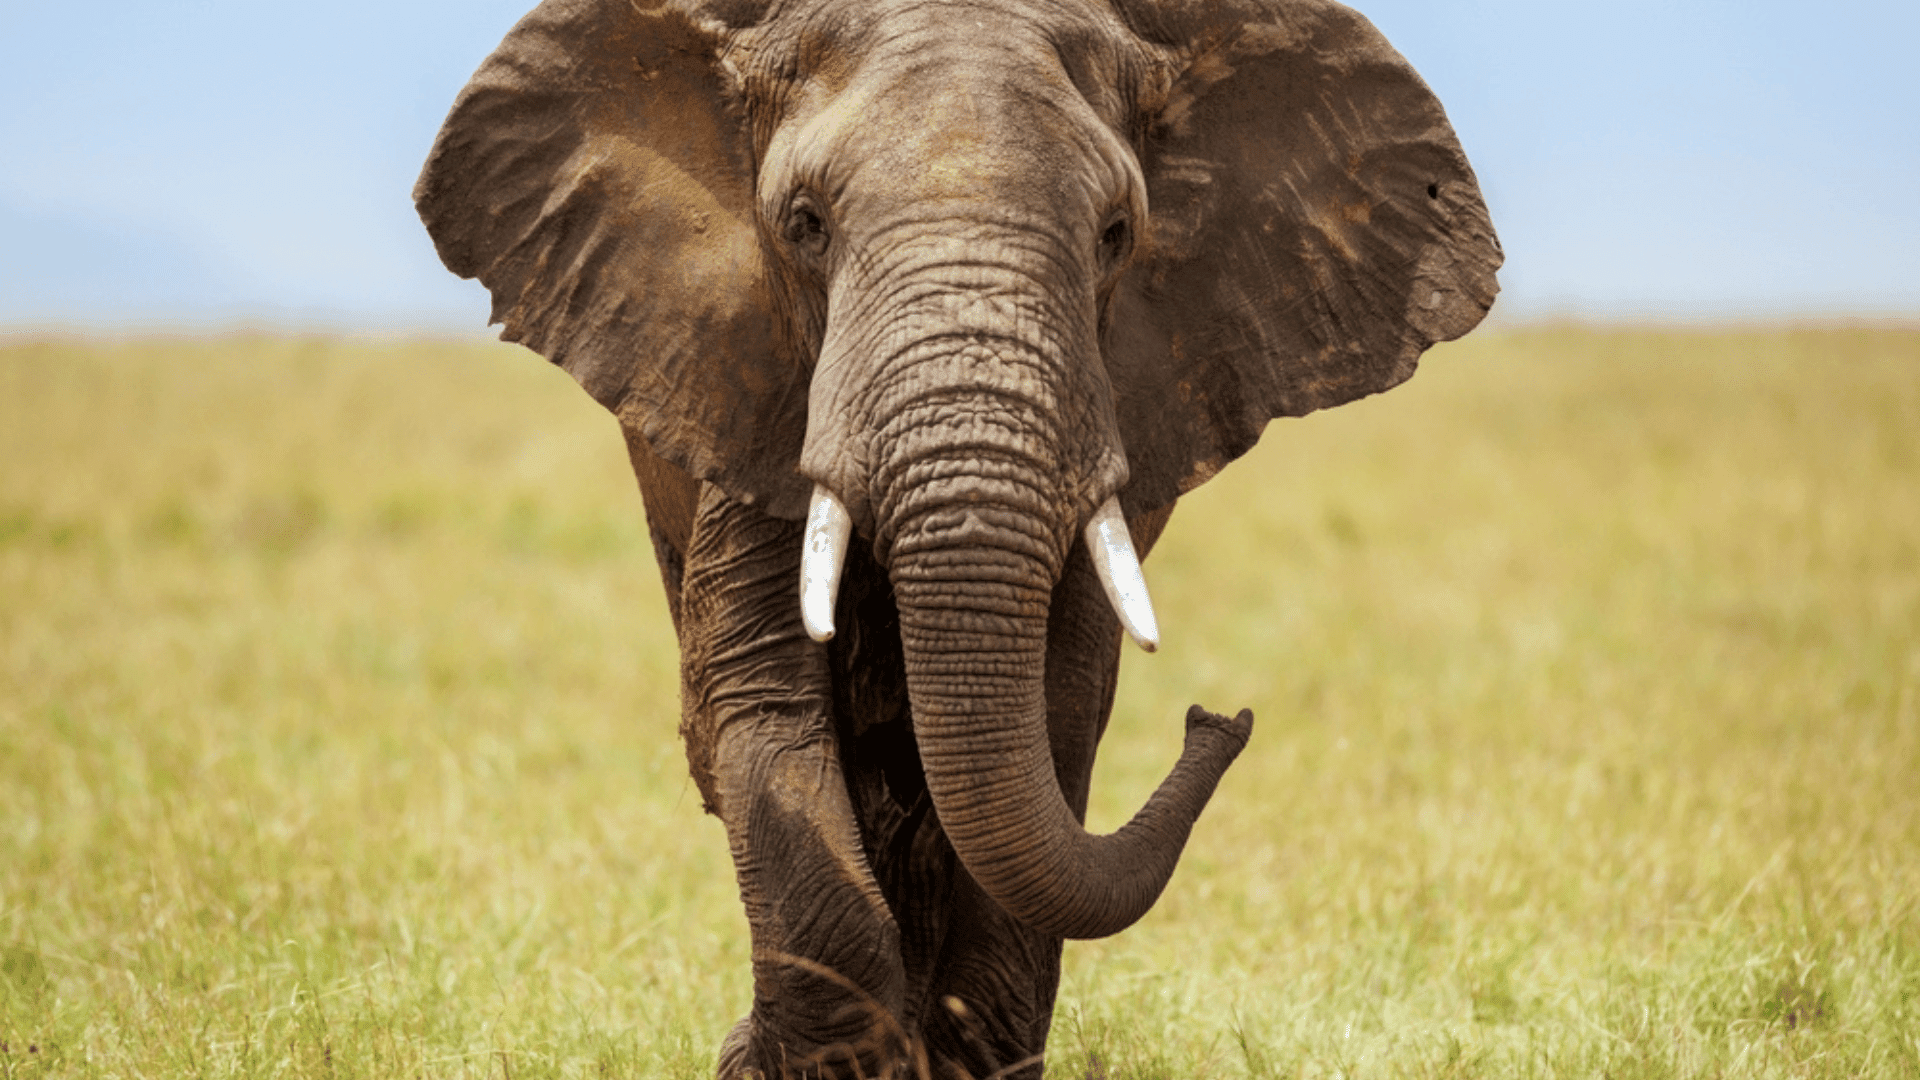 Elephants Can Communicate at a Frequency That Humans Can't Hear